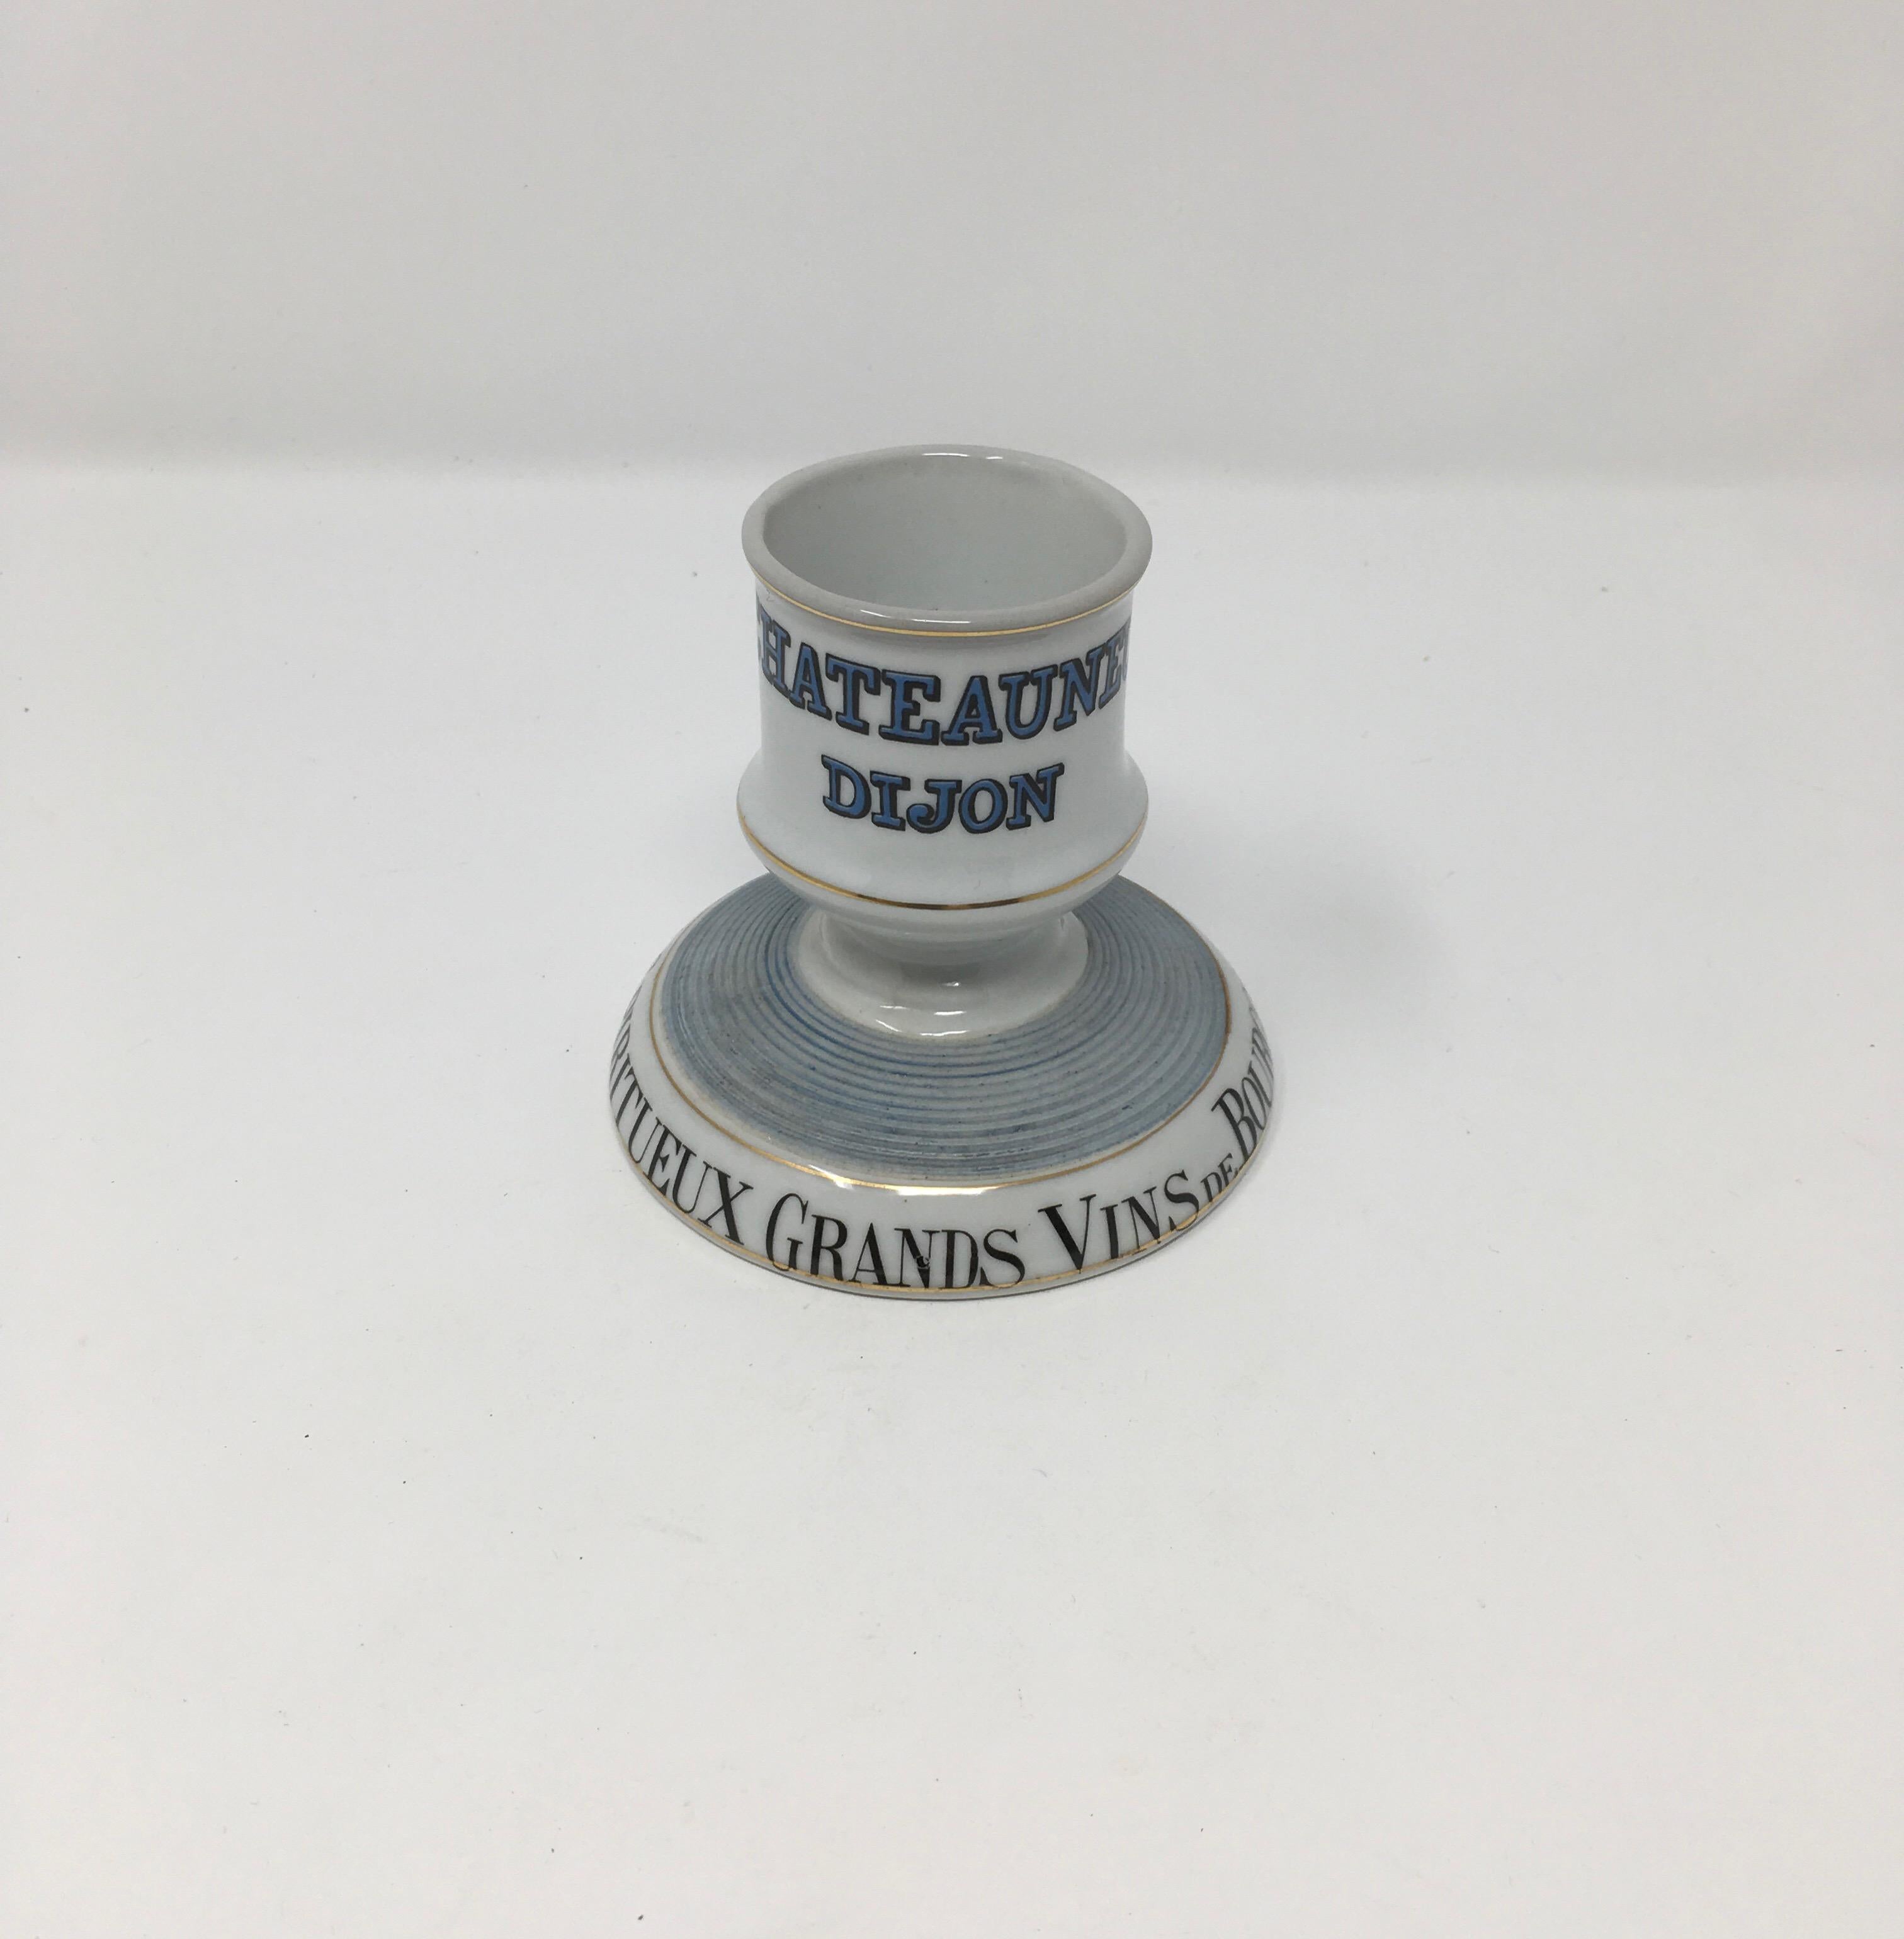 This French ceramic match striker and holder was made in the early 1900s. Match strikers were given to French bistros as a form of advertisement. This striker is made of white porcelain with decorative black lettering around the base and black